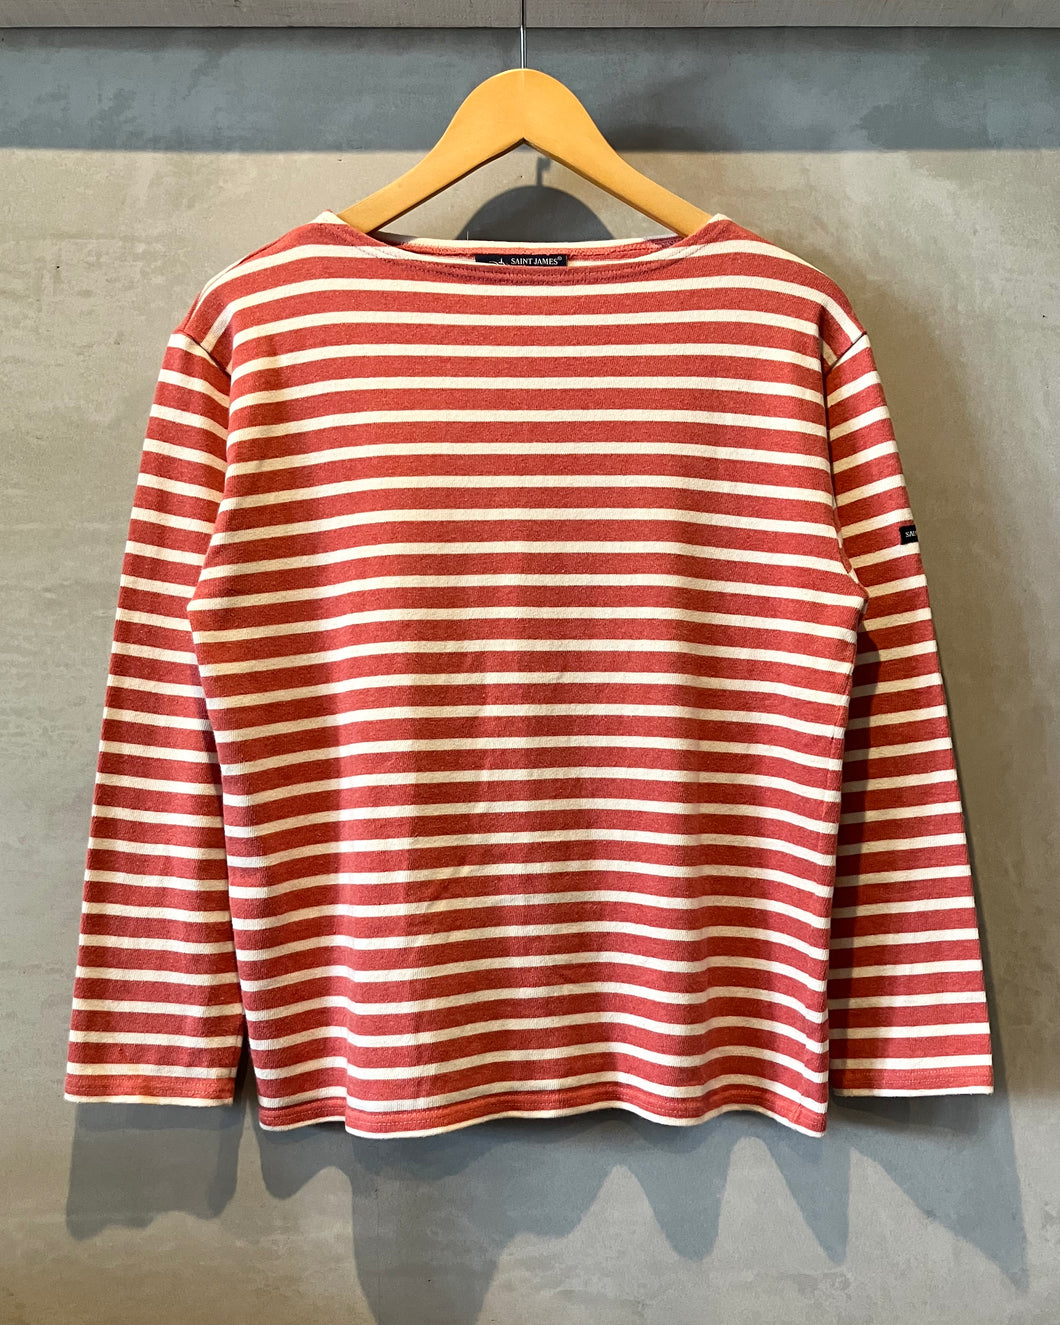 SAINT JAMES-L/S T-shirt-(size SM)Made in FRANCE